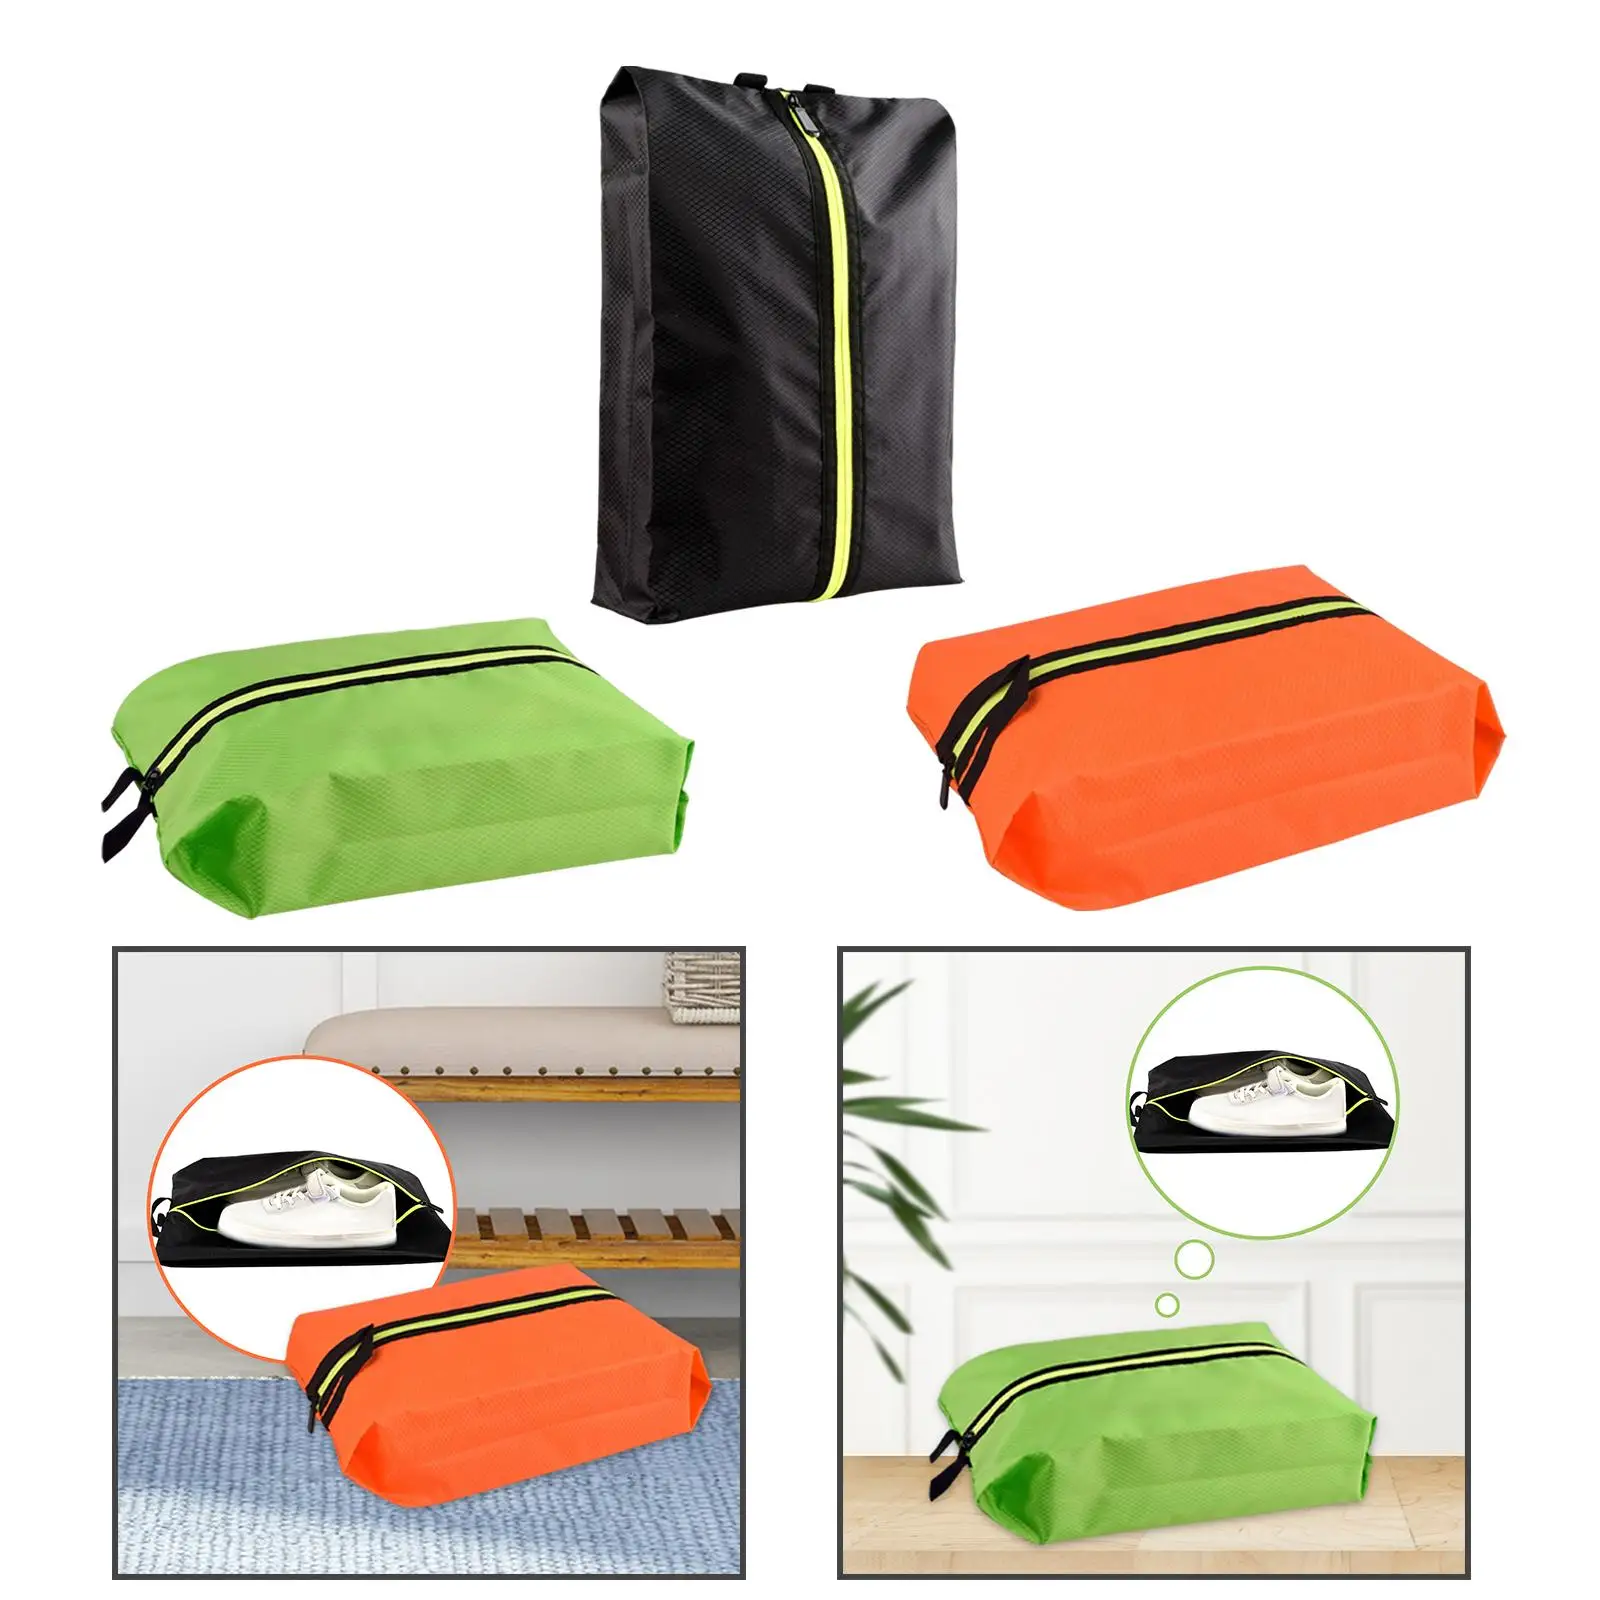 Multifunction Travel Shoes Storage Bag Luggage Space Saving Shoe Organizer for Sports Home